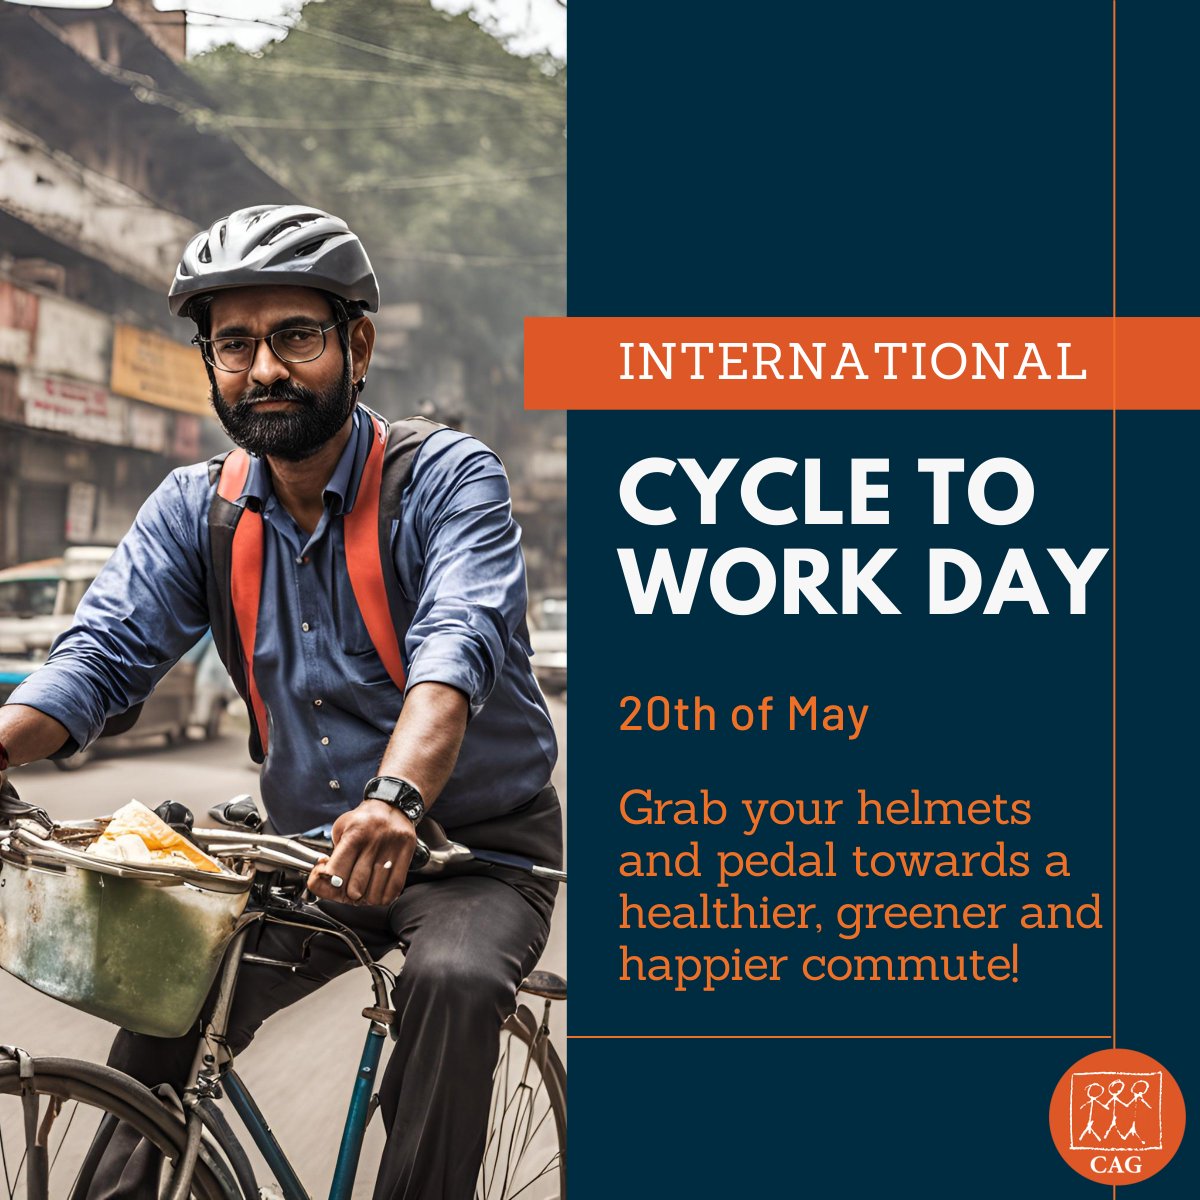 Running low on exercise during workdays? Dust off your bike & start cycling to celebrate pedal power! Reclaim valuable time, enjoy health benefits & reduce traffic. Cycle to work alongside your colleagues, embracing the spirit of International Cycle to Work Day. @chennaicorp